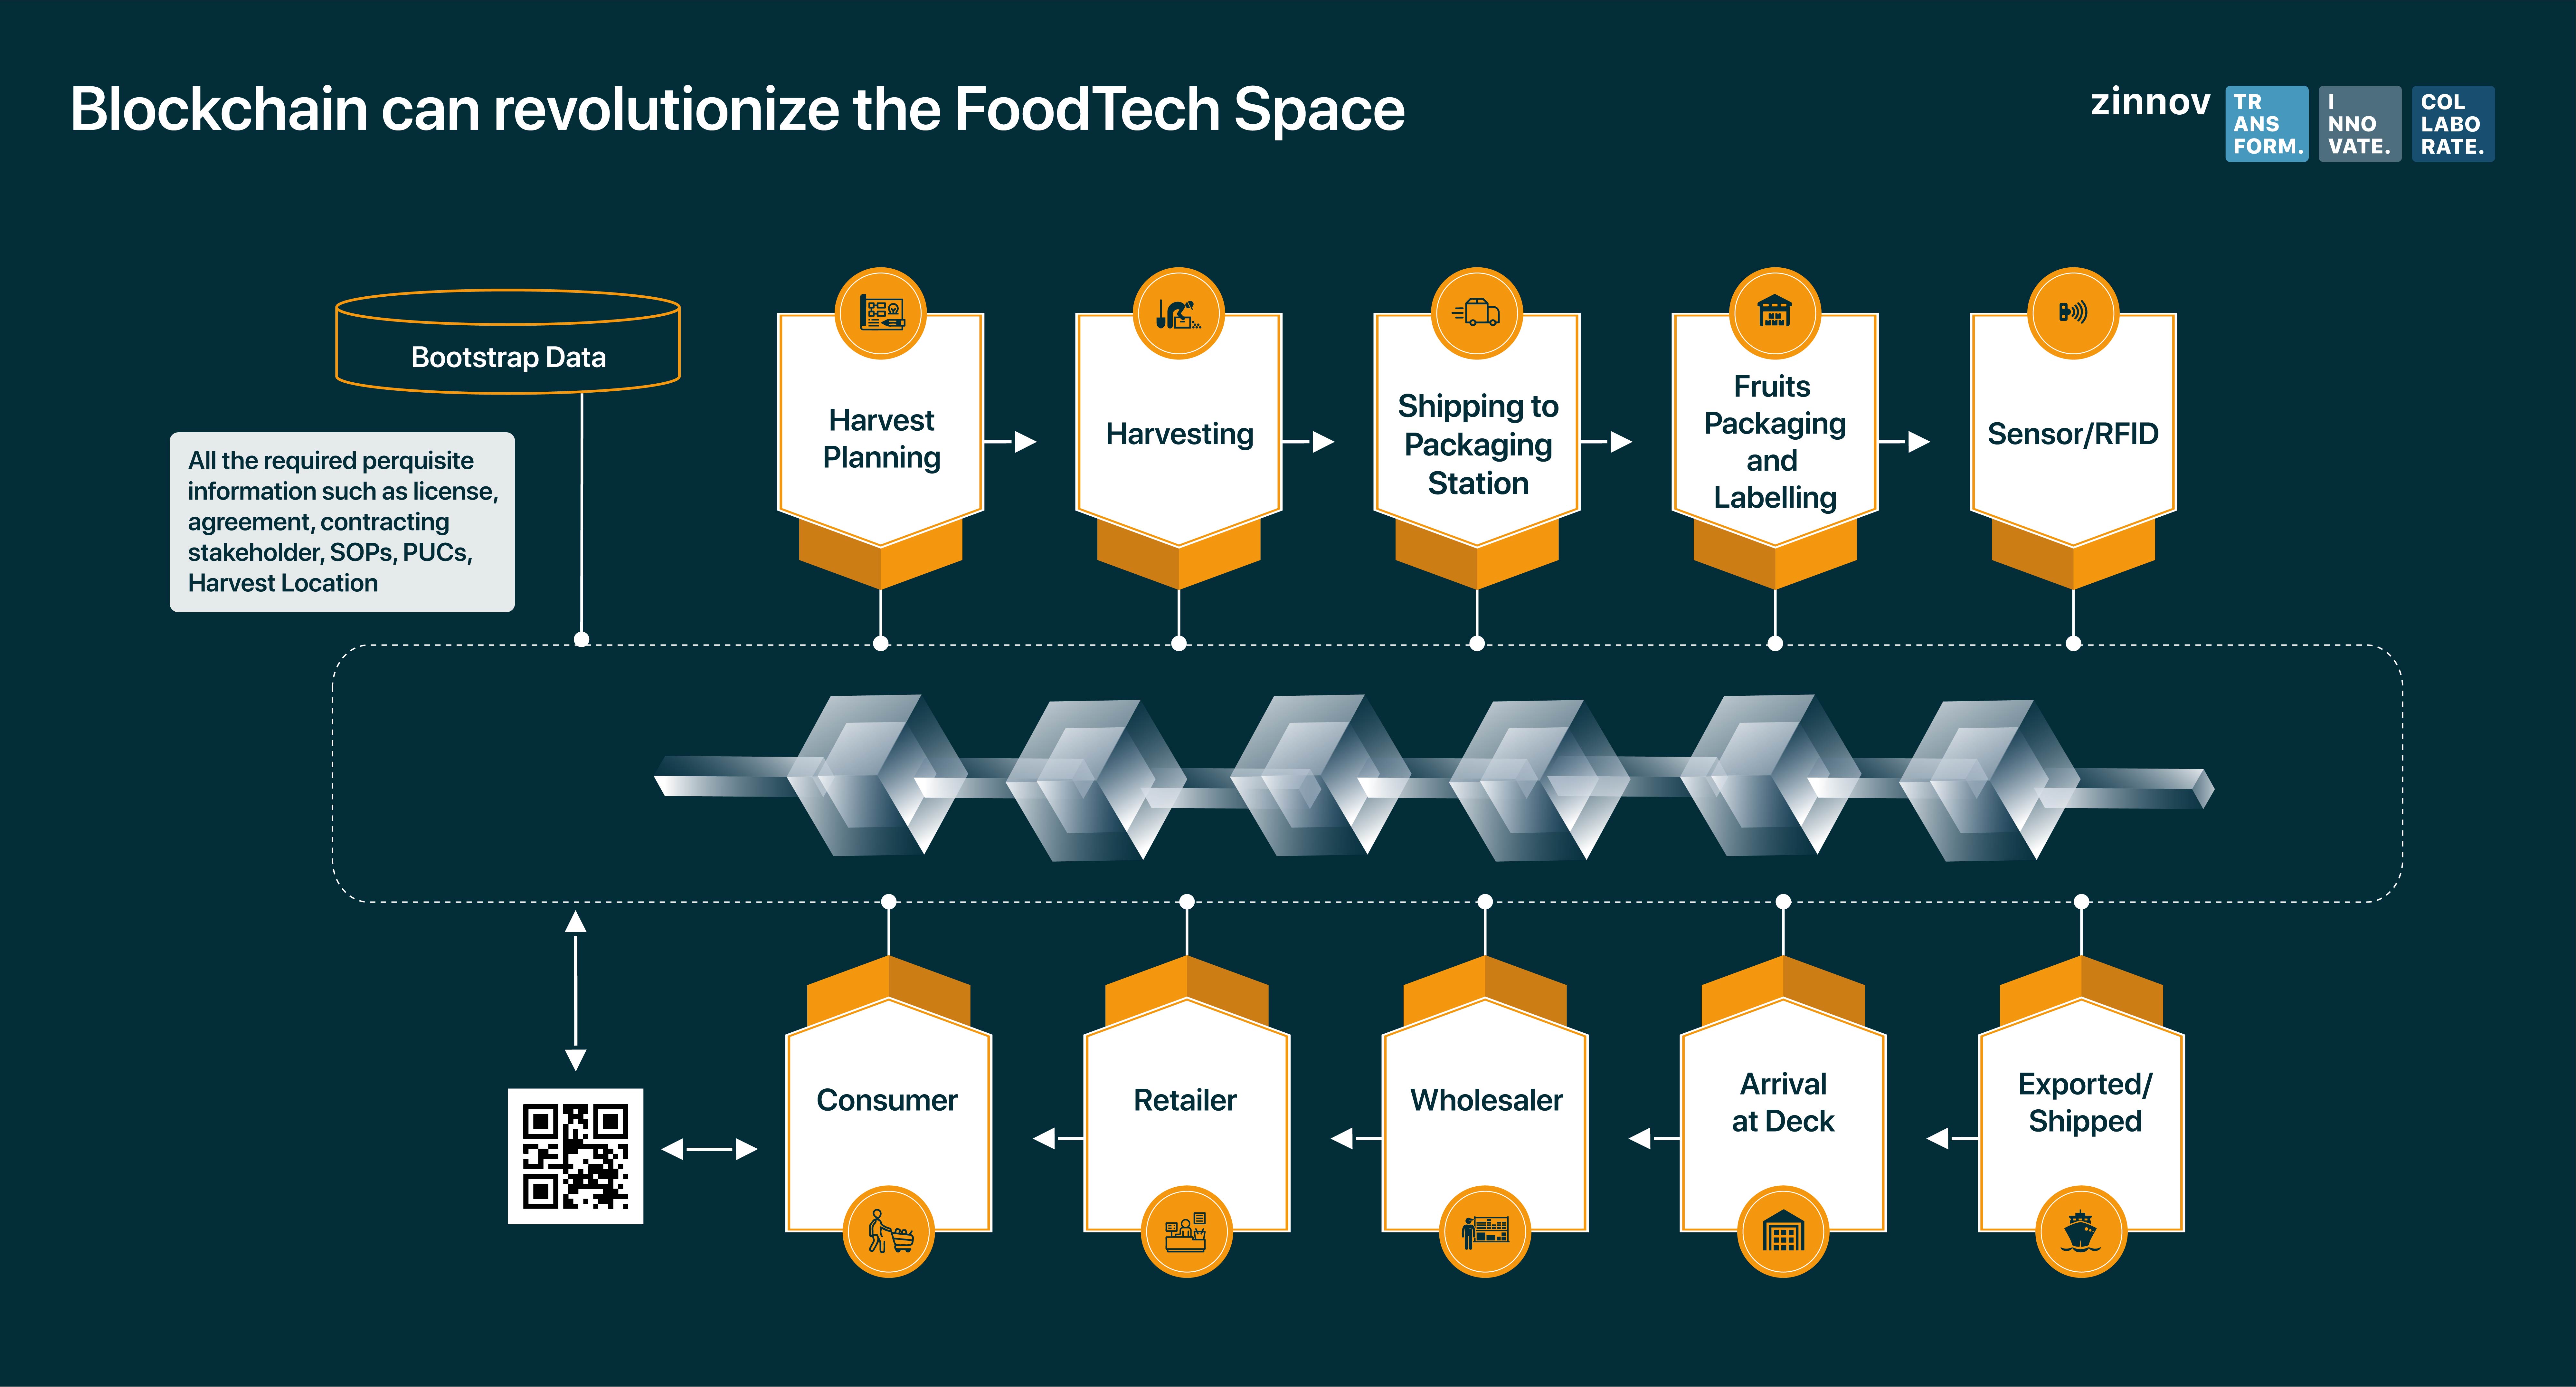 Blockchain technology in the FoodTech space